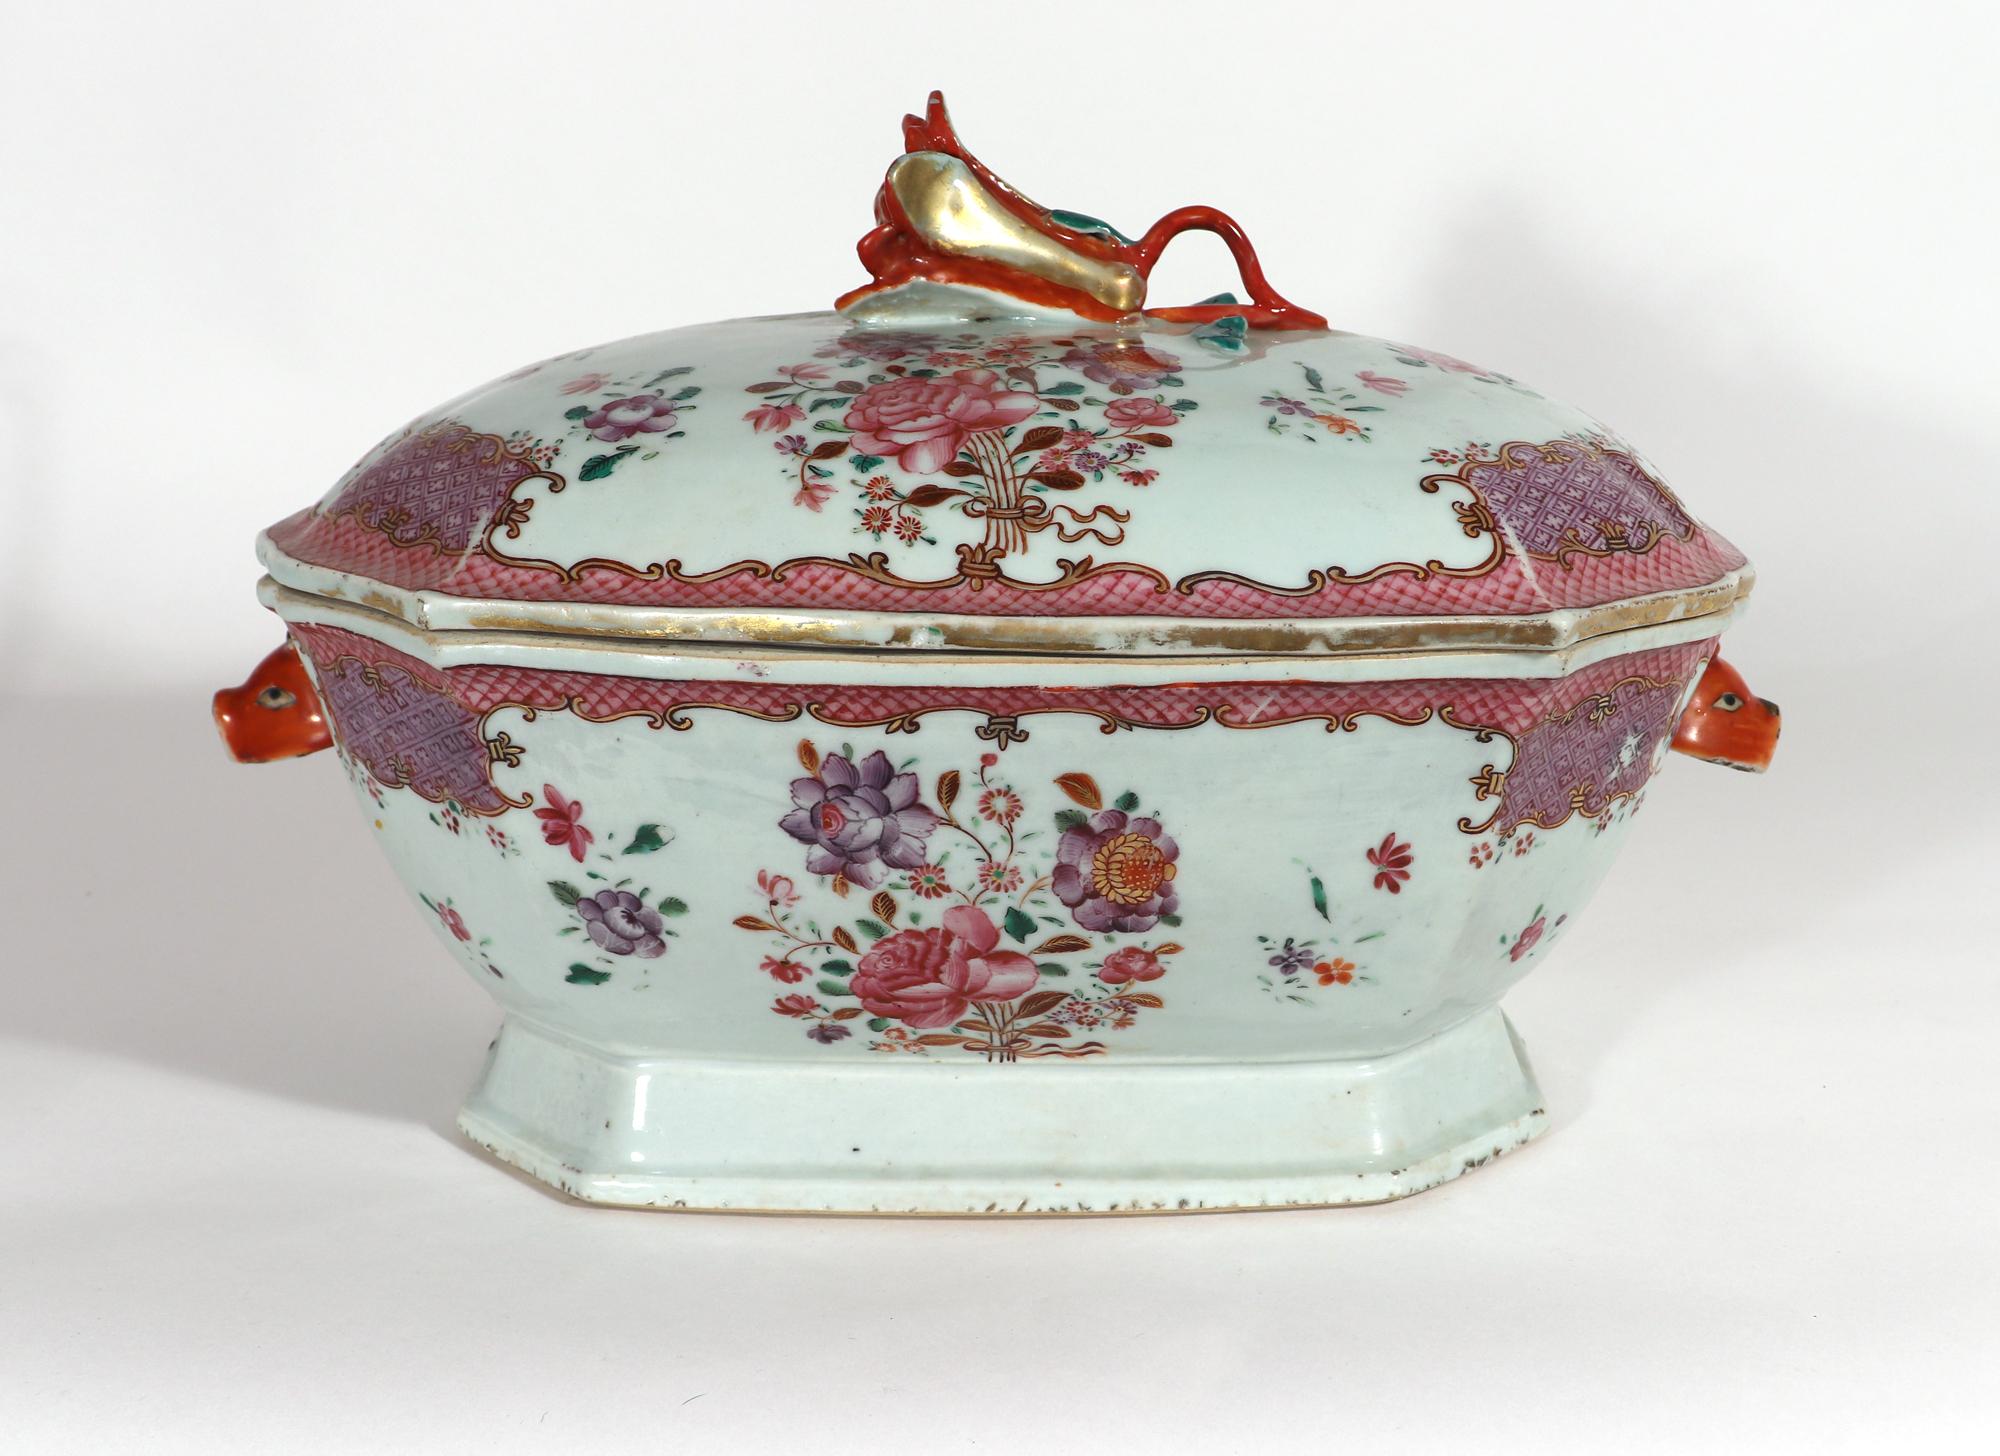 Chinese Export Porcelain European Flower Botanical Soup Tureen & Cover,
Circa 1780

The Chinese Export porcelain tureen and cover are well painted with large European bouquets of flowers in pink and purple with scattered flowers around on either